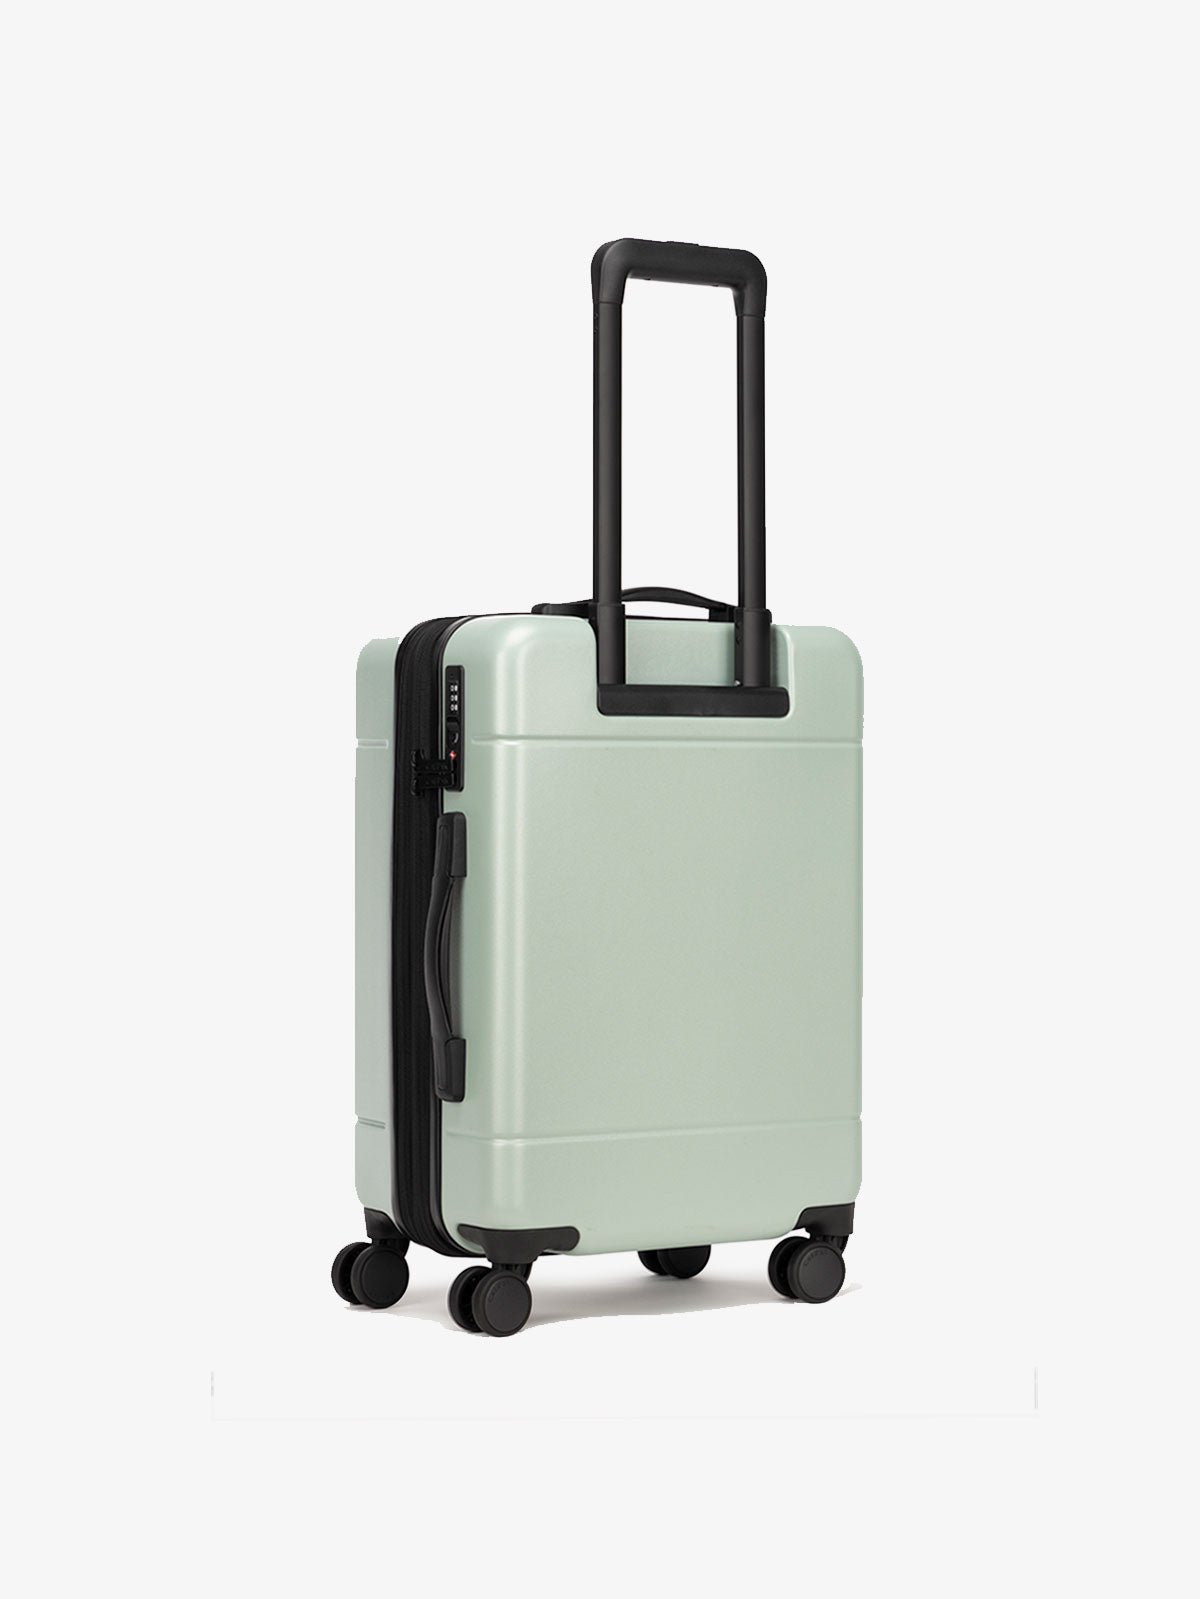 Hue carry on hard side luggage with 360 spinner wheels